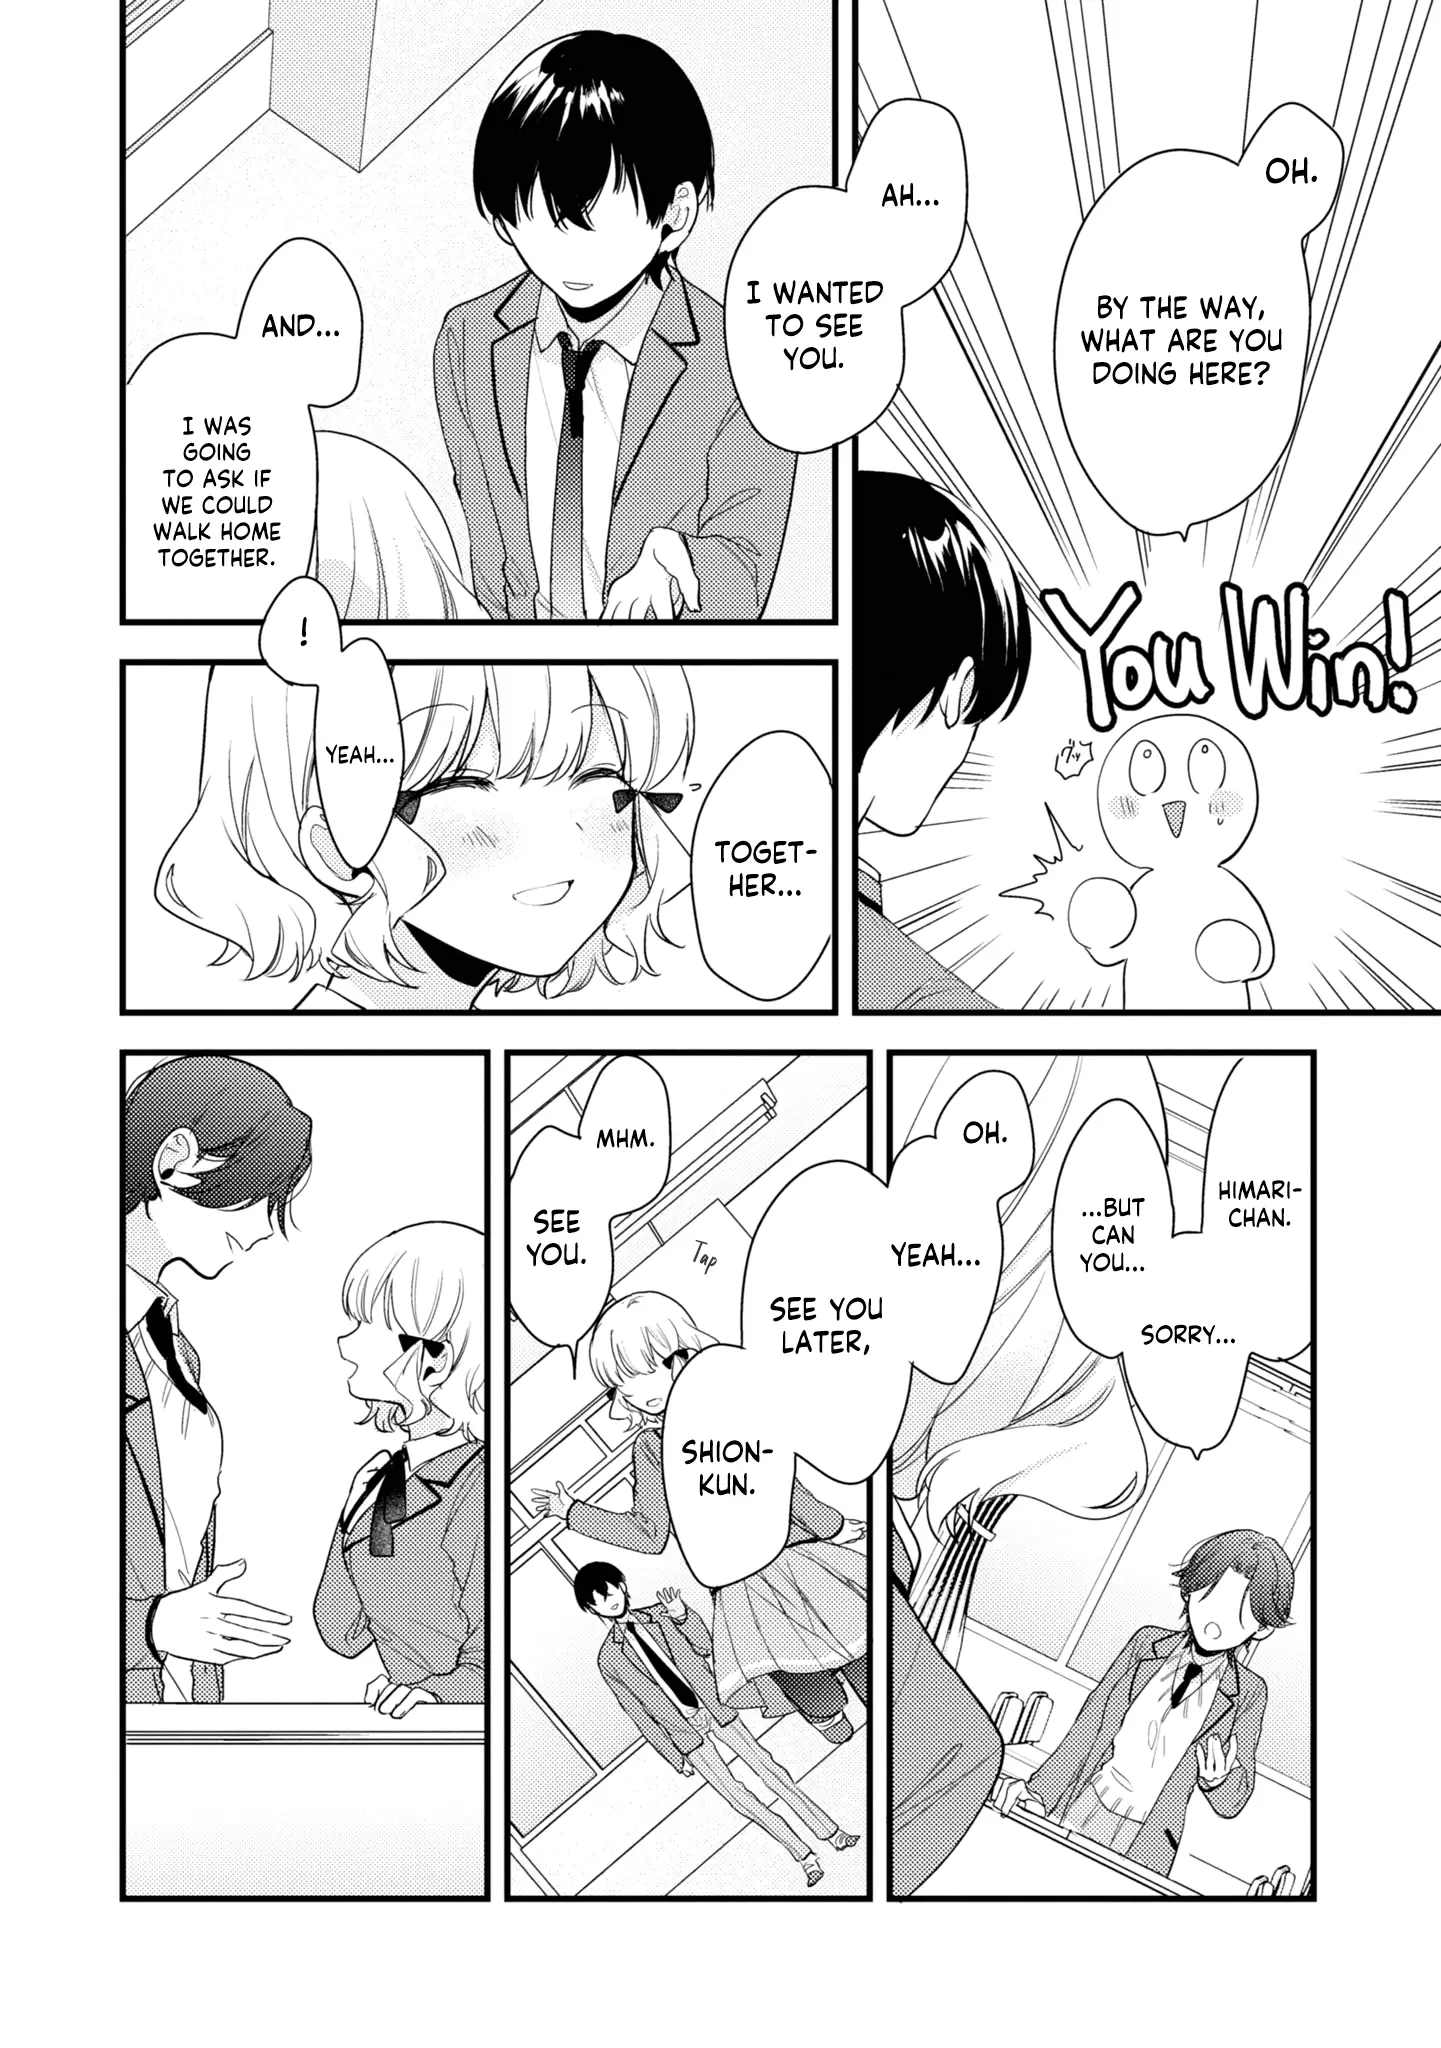 I Have A Second Chance At Life, So I’Ll Pamper My Yandere Boyfriend For A Happy Ending!! - 2 page 21-77f54c29